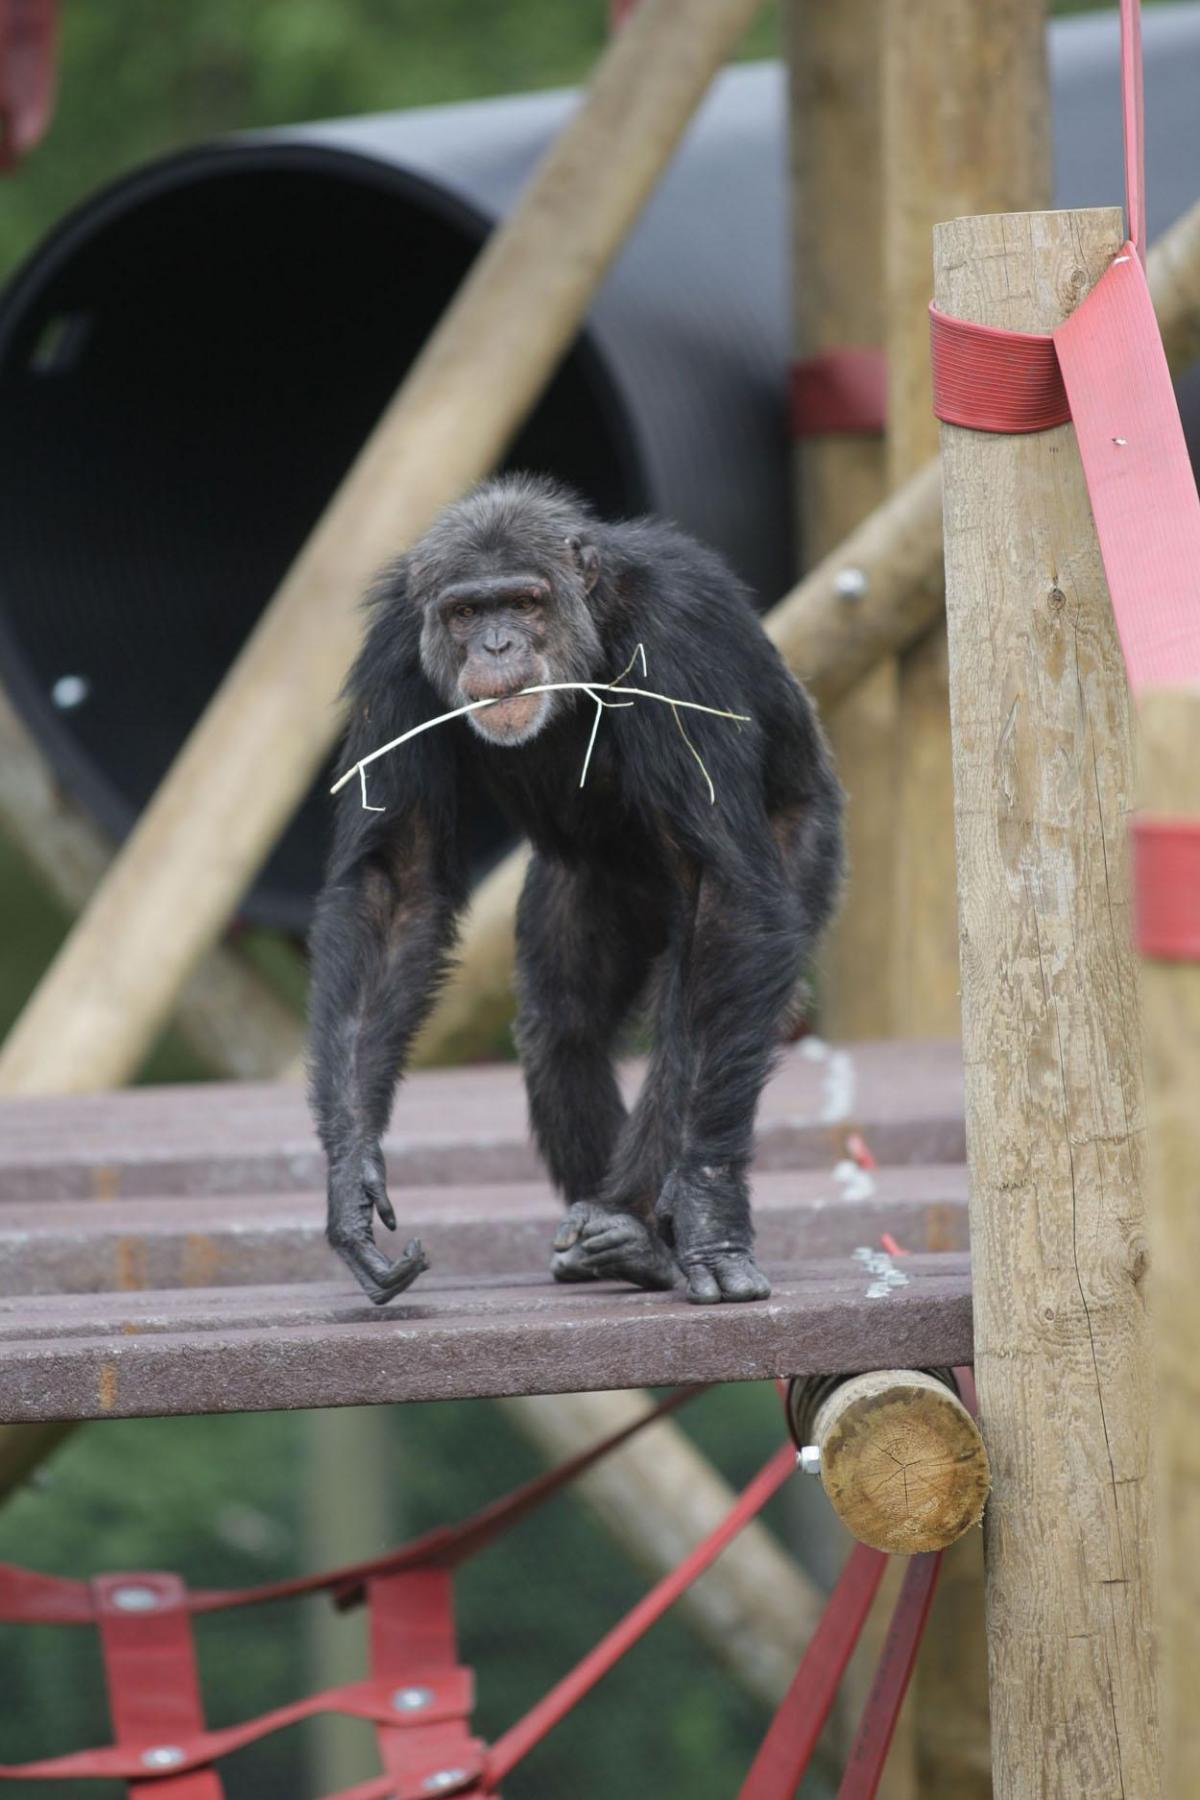 Pictures of Monkey World, its residents and famous visitors through the years from the Daily Echo archives. 